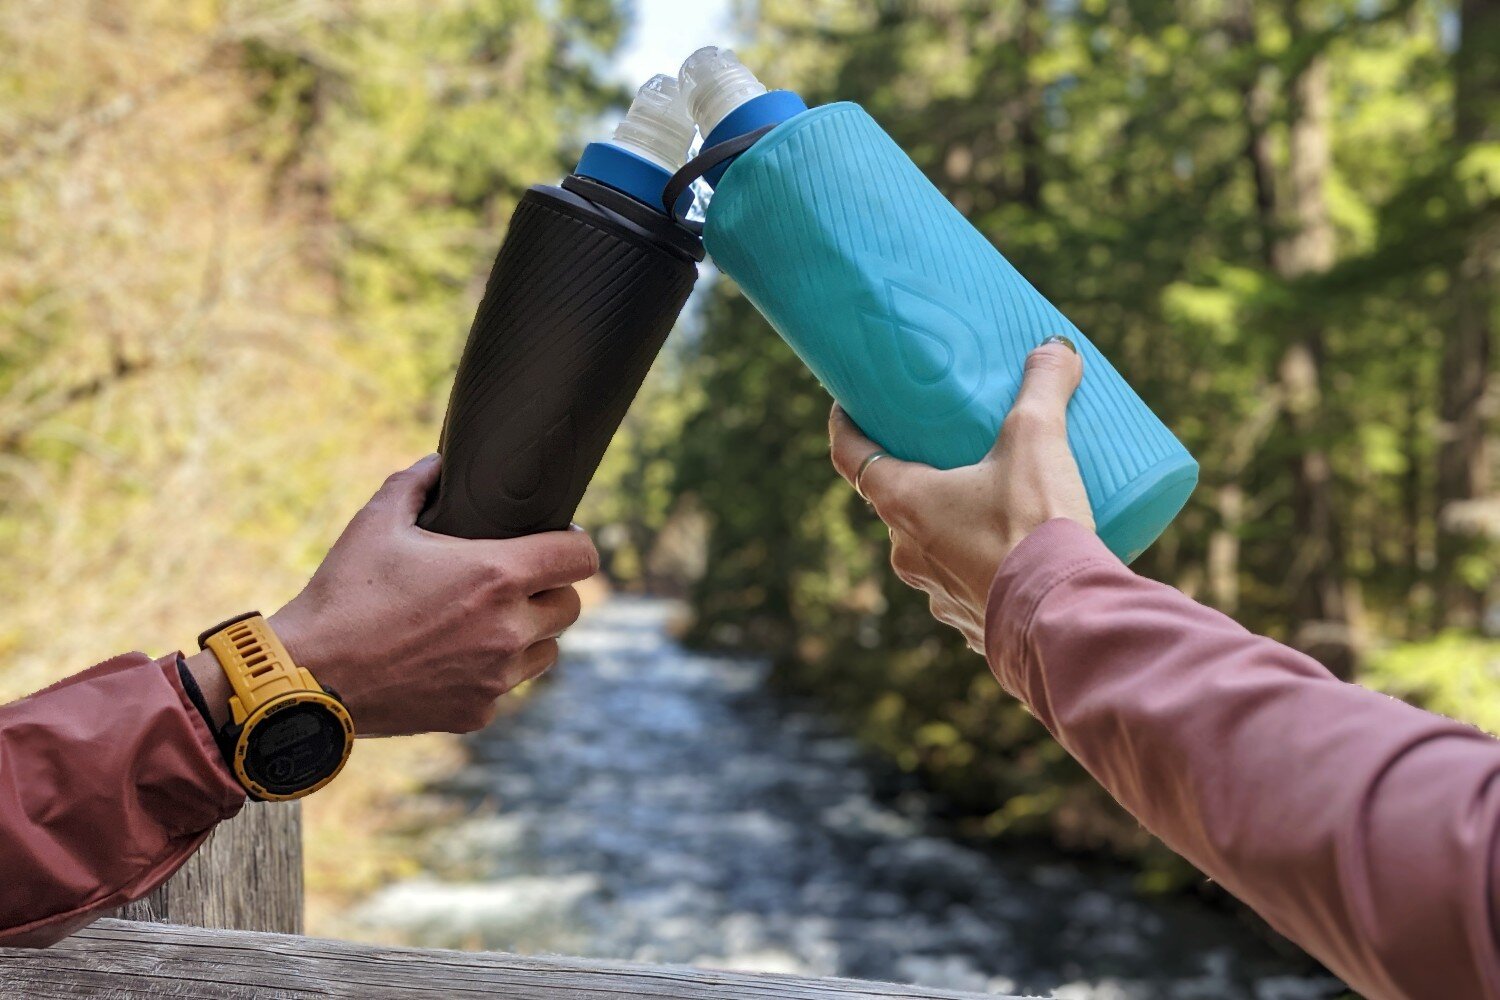 The Katadyn BeFree and Hydrapak Flux Soft Bottle make for an ultralight water system